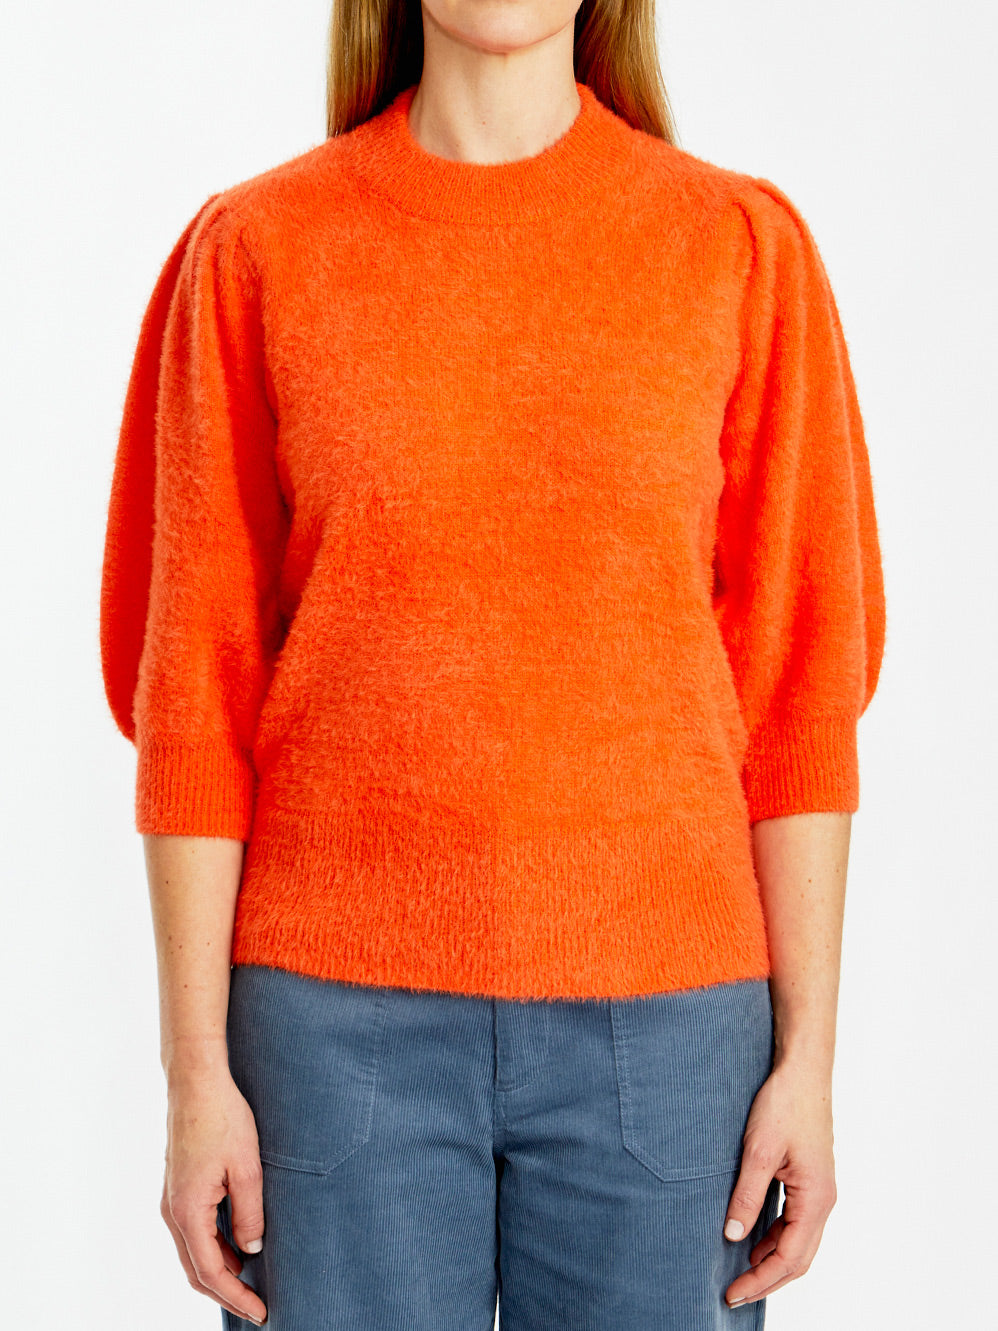 PINGPONG FLUFFY AUDREY PULLOVER